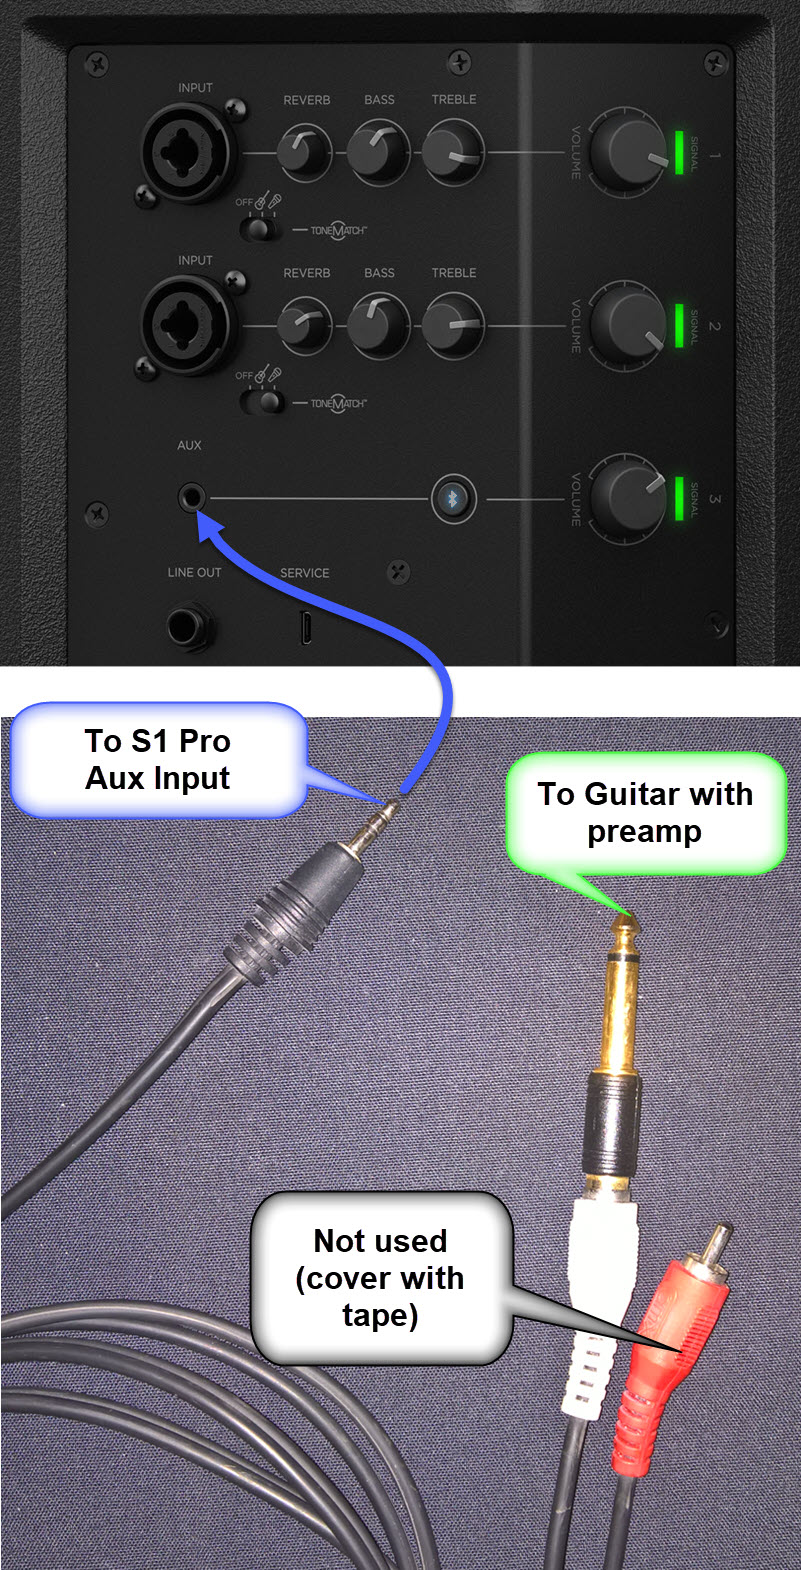 Guitar to S1 Pro Aux Input.jpg